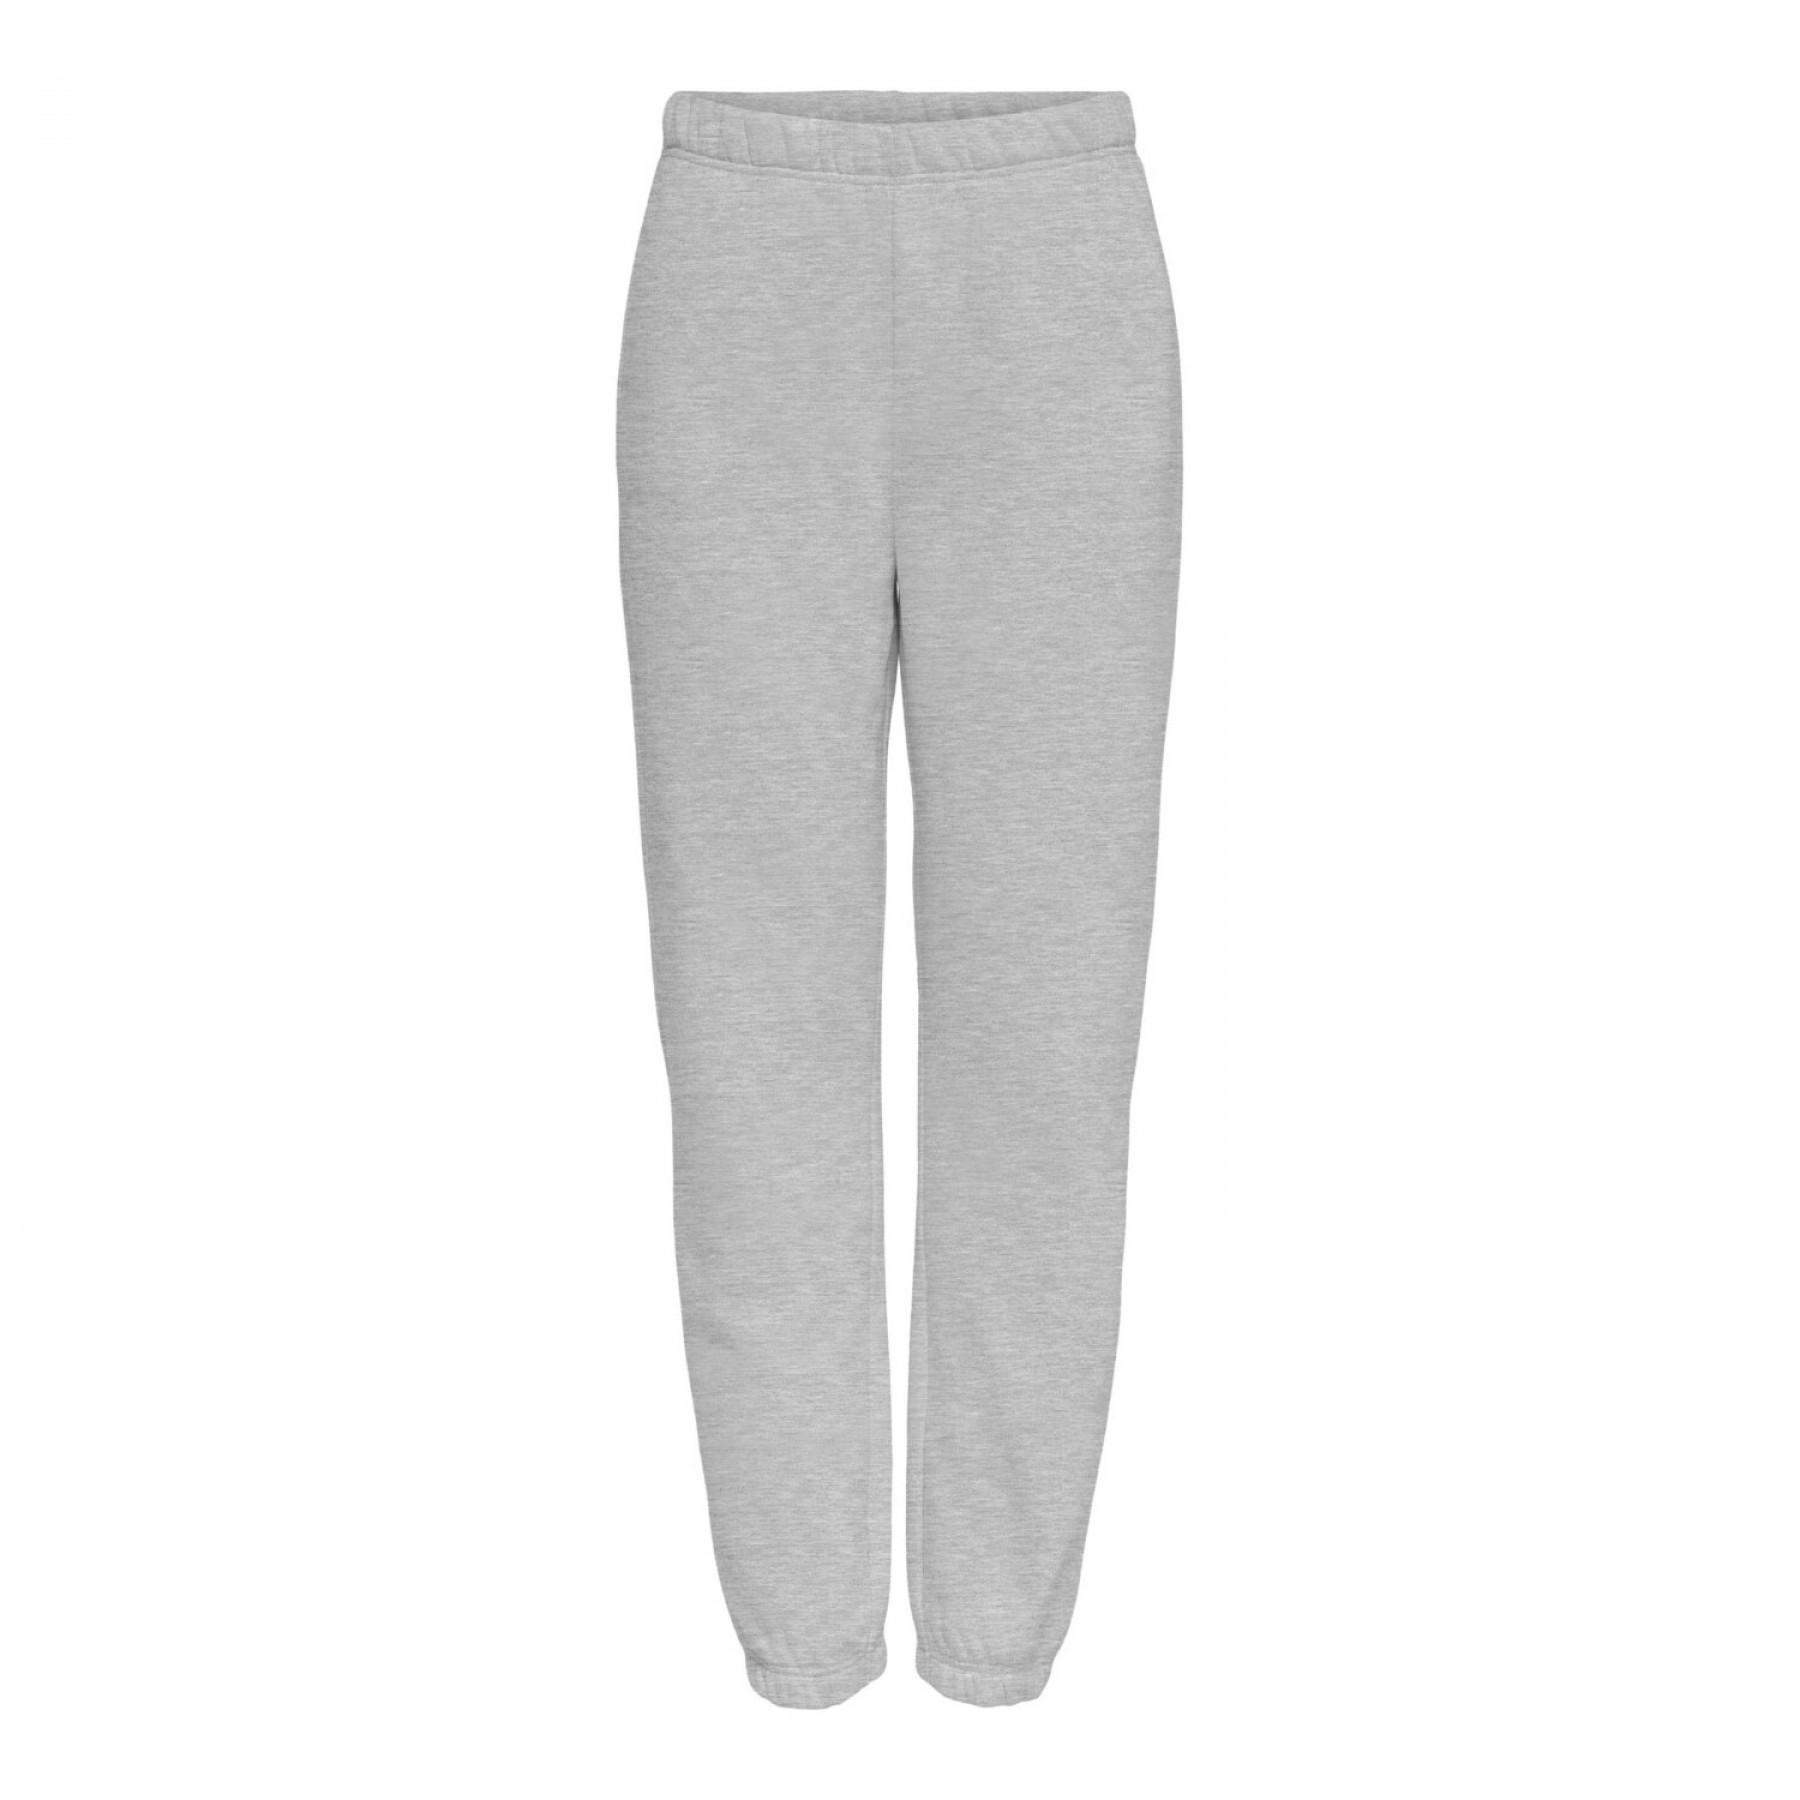 Women's trousers Only onldreamer lifeat